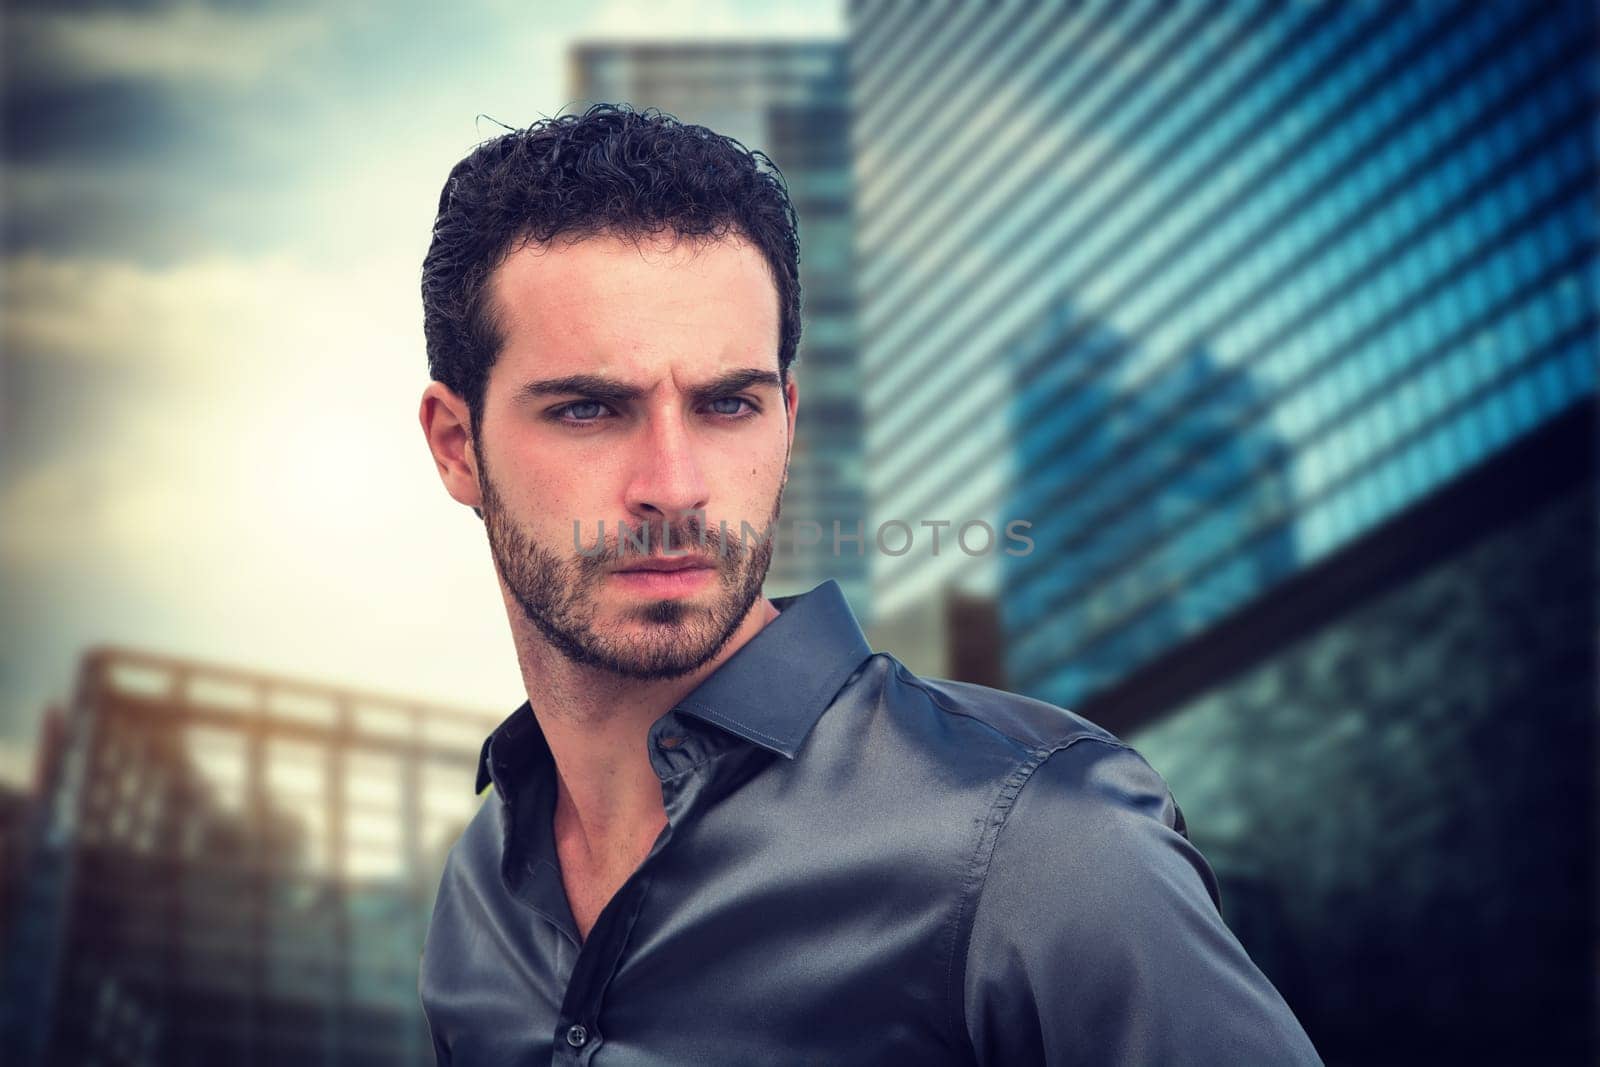 A Glimpse of Urban Majesty: A Man Standing in Front of a Tall Building by artofphoto